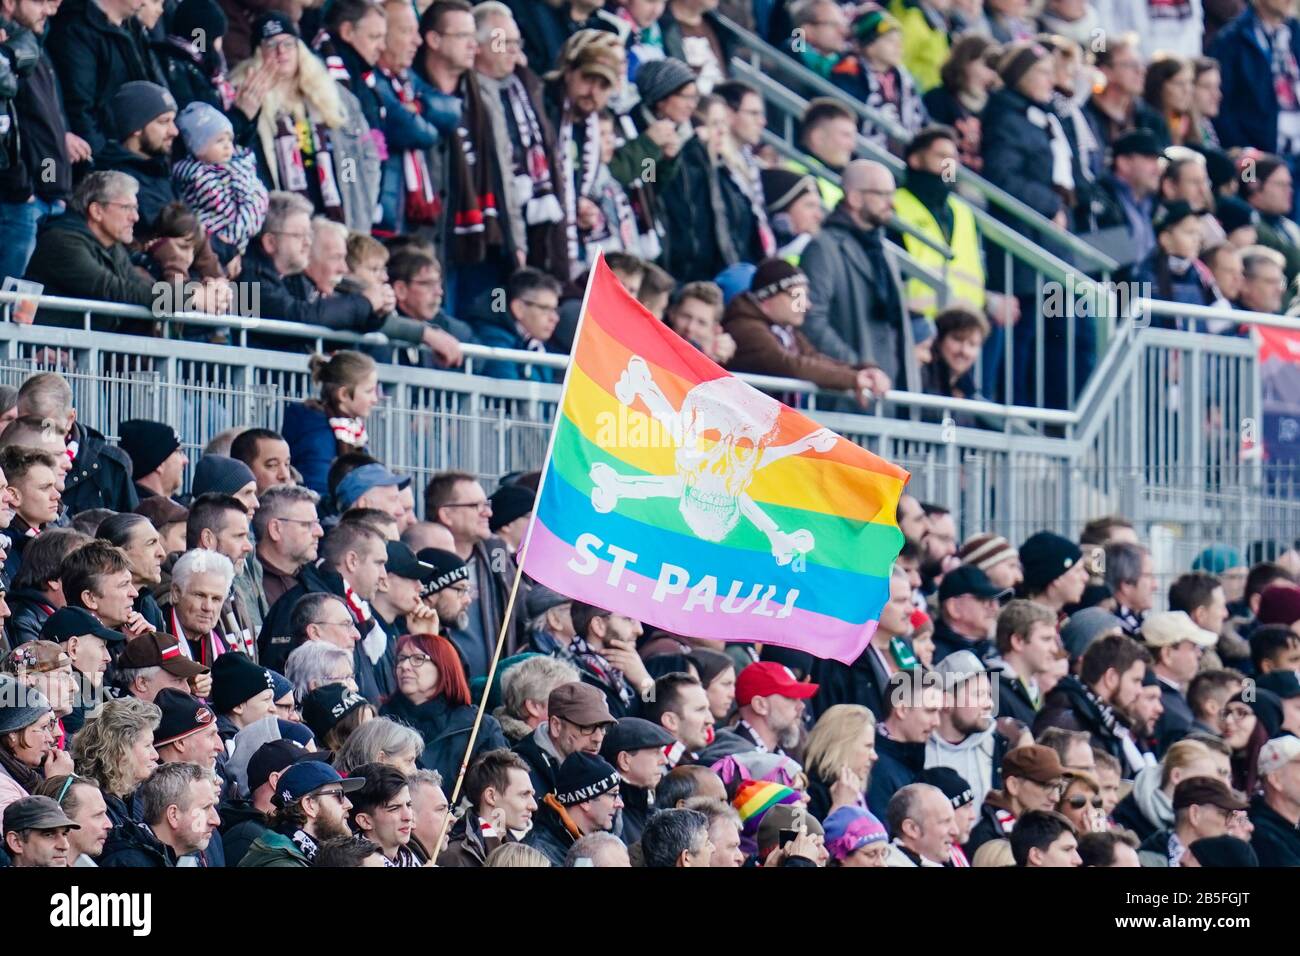 Sandhausen, Germany. 08th Mar, 2020. Football: 2nd Bundesliga, 25th matchday, SV Sandhausen - FC St. Pauli, Hardtwaldstadion. Fans of St. Pauli wave a flag in rainbow colours with the club logo. Credit: Uwe Anspach/dpa - IMPORTANT NOTE: In accordance with the regulations of the DFL Deutsche Fußball Liga and the DFB Deutscher Fußball-Bund, it is prohibited to exploit or have exploited in the stadium and/or from the game taken photographs in the form of sequence images and/or video-like photo series./dpa/Alamy Live News Stock Photo